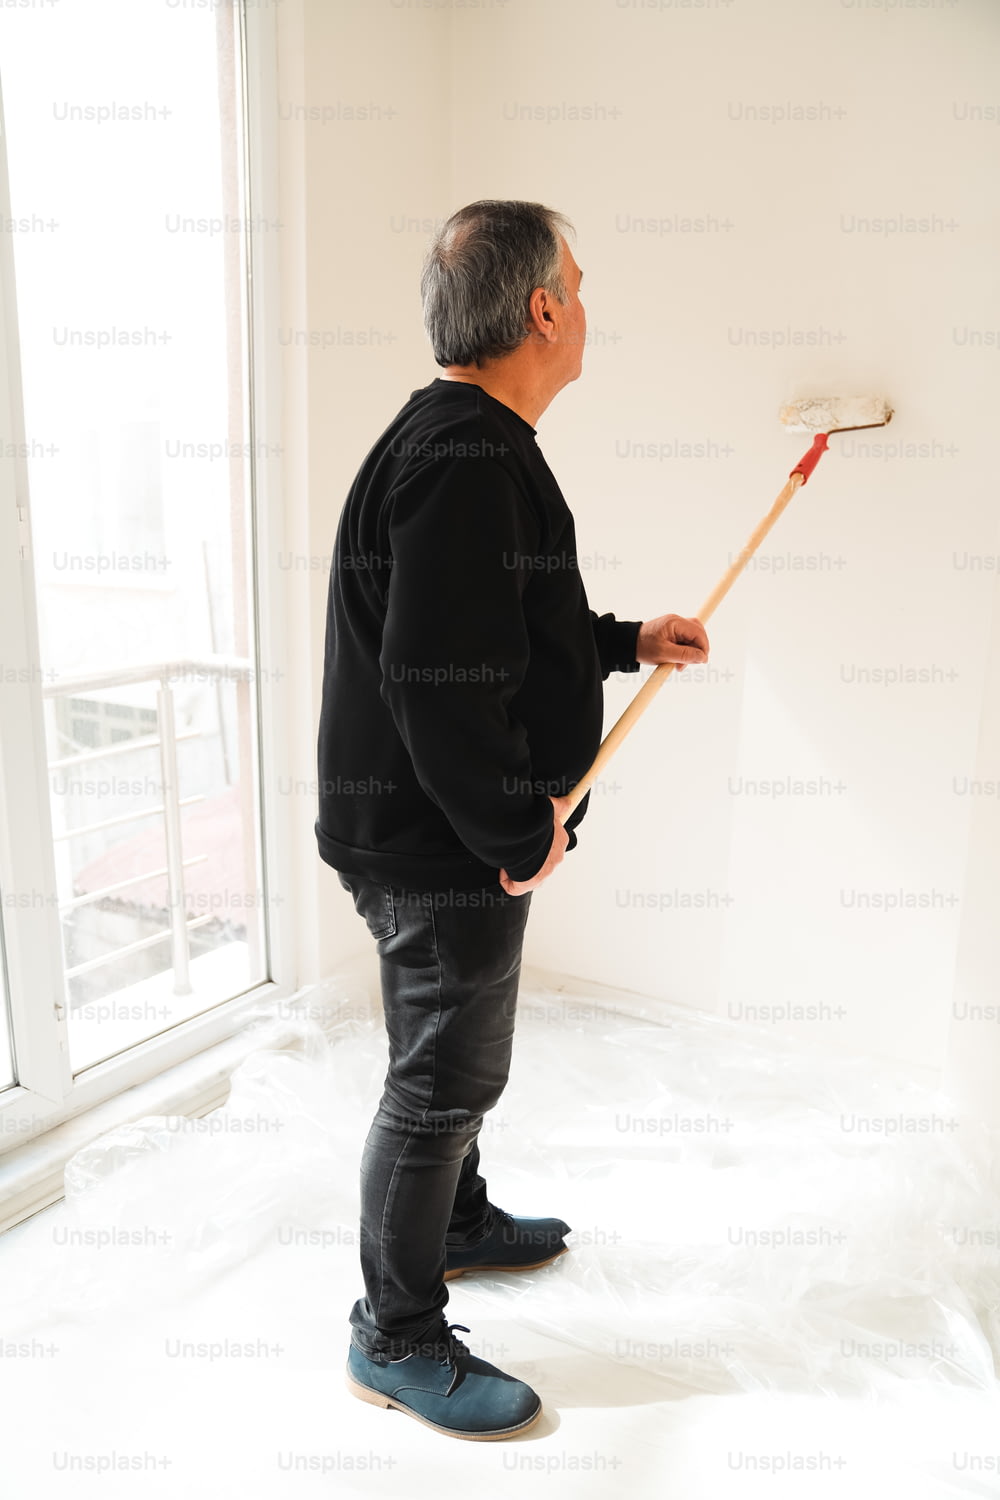 a man in a black shirt is holding a broom